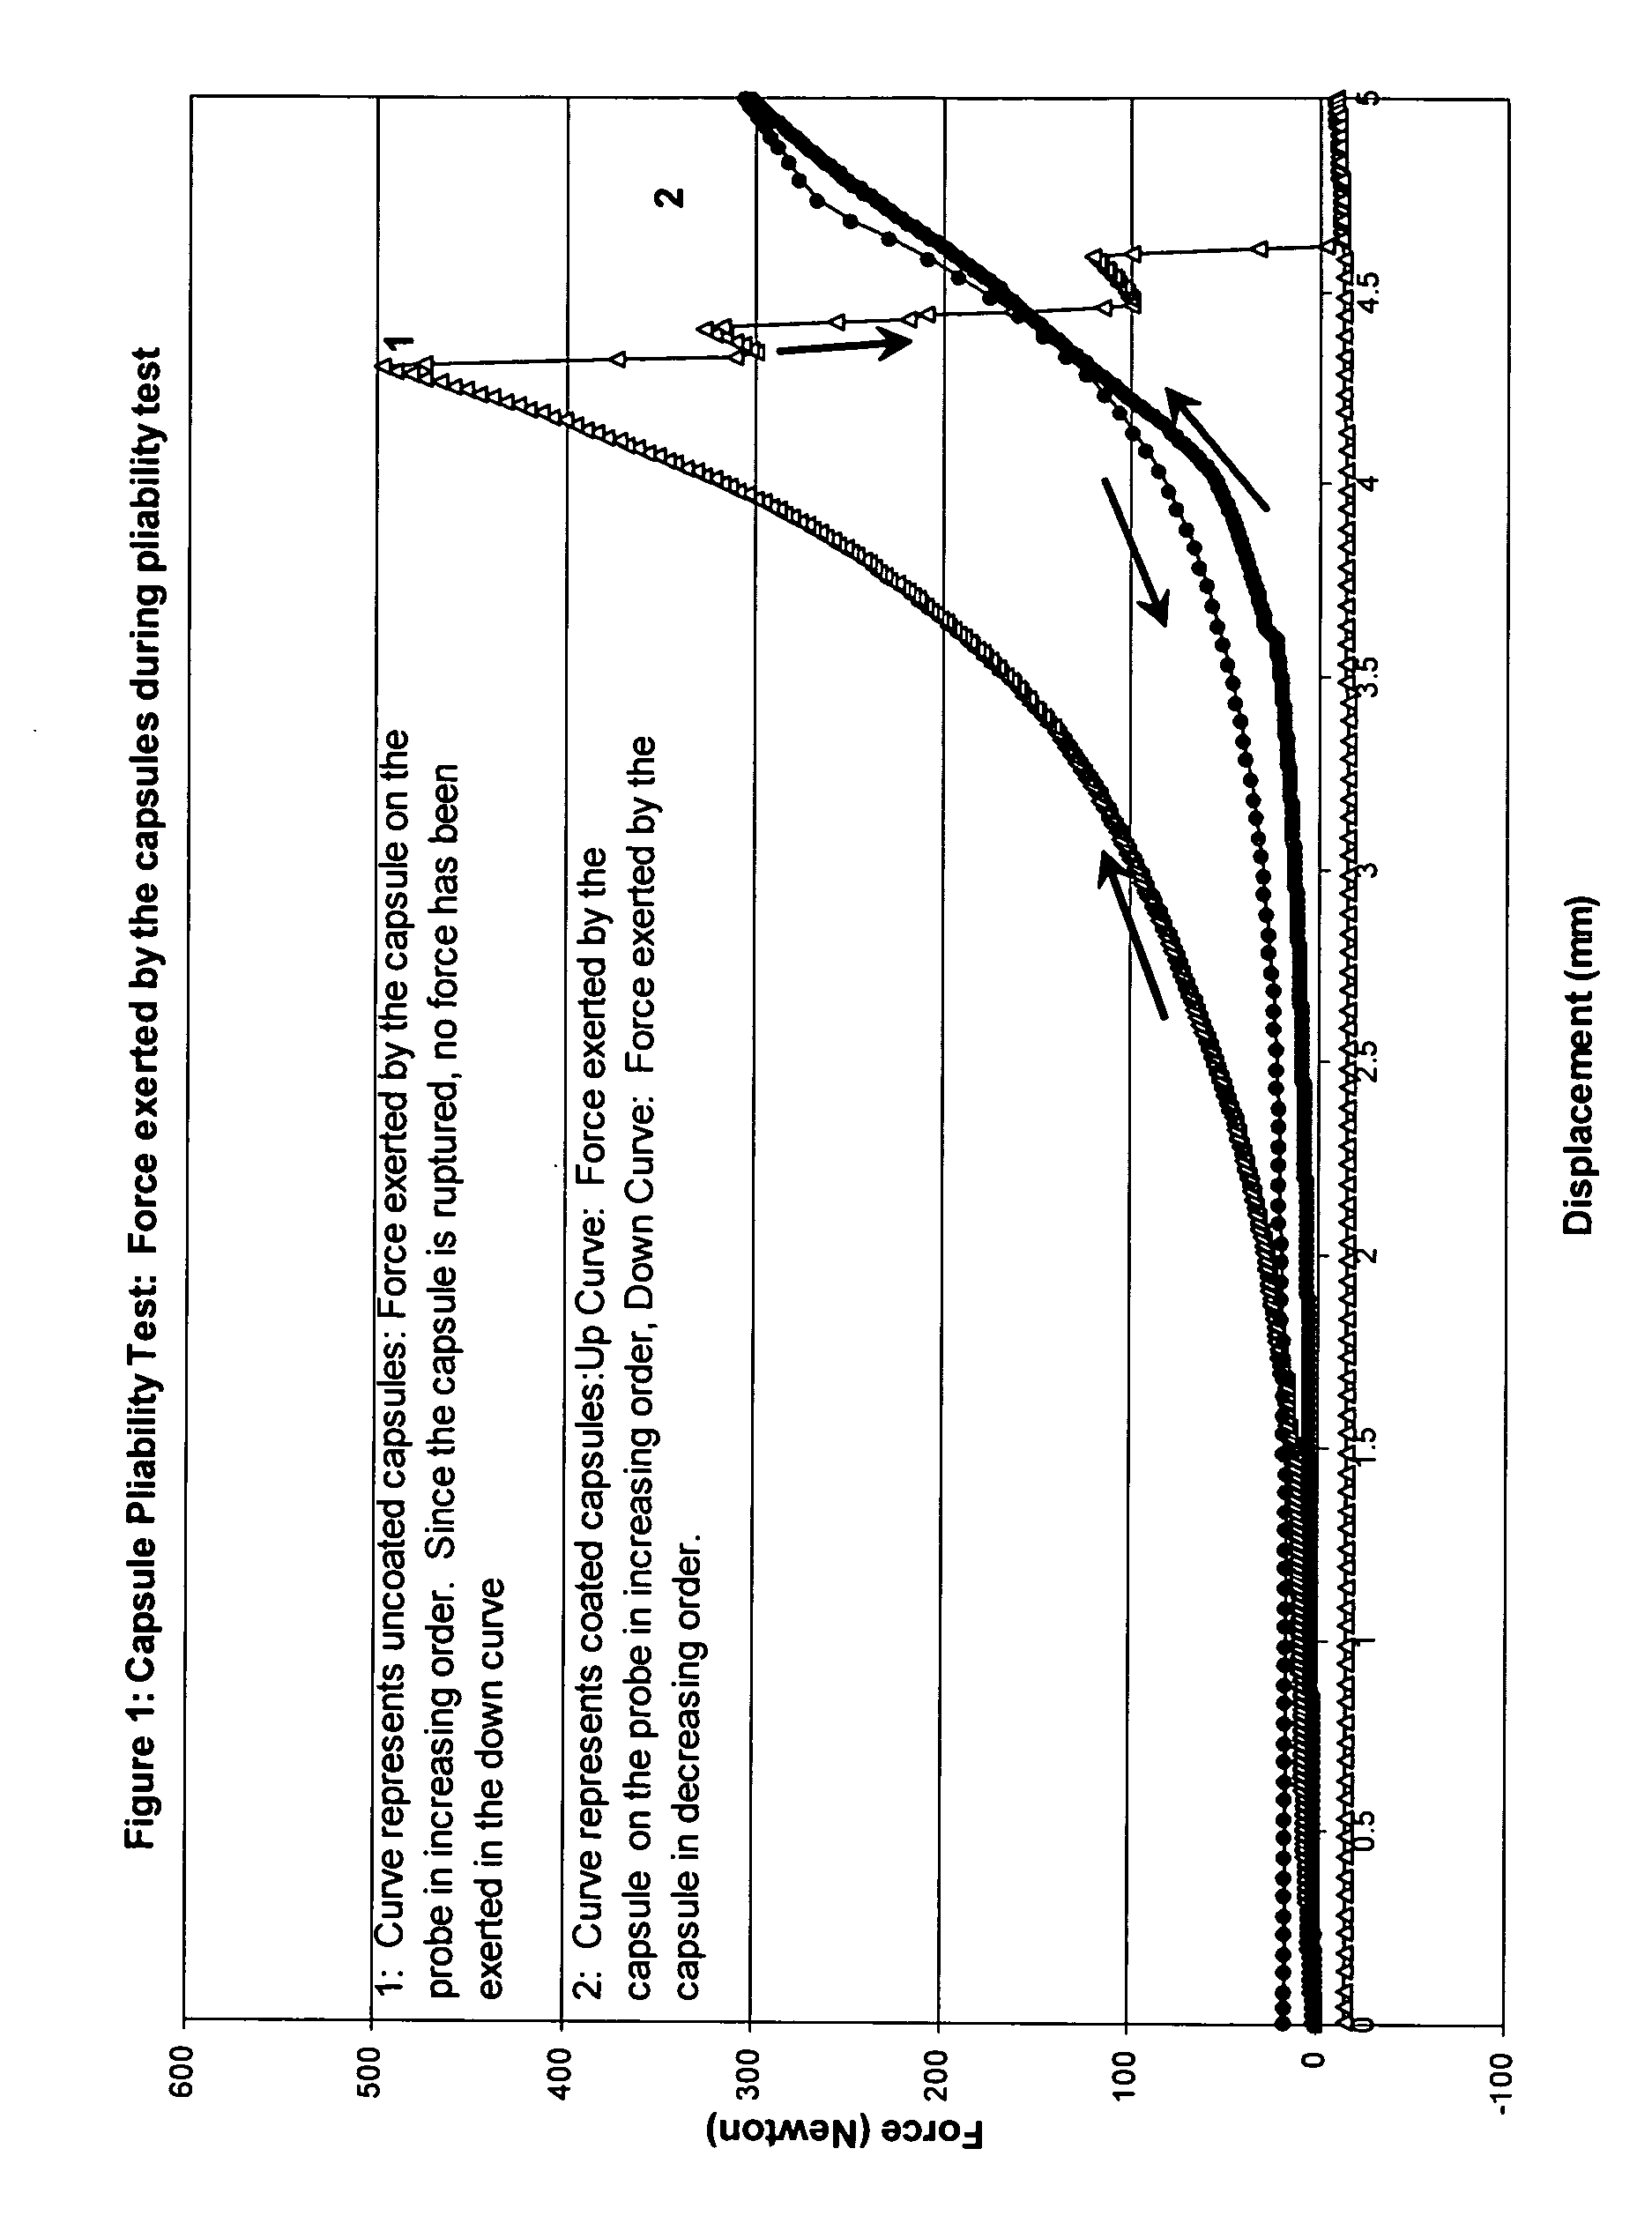 Coated capsules and methods of making and using the same